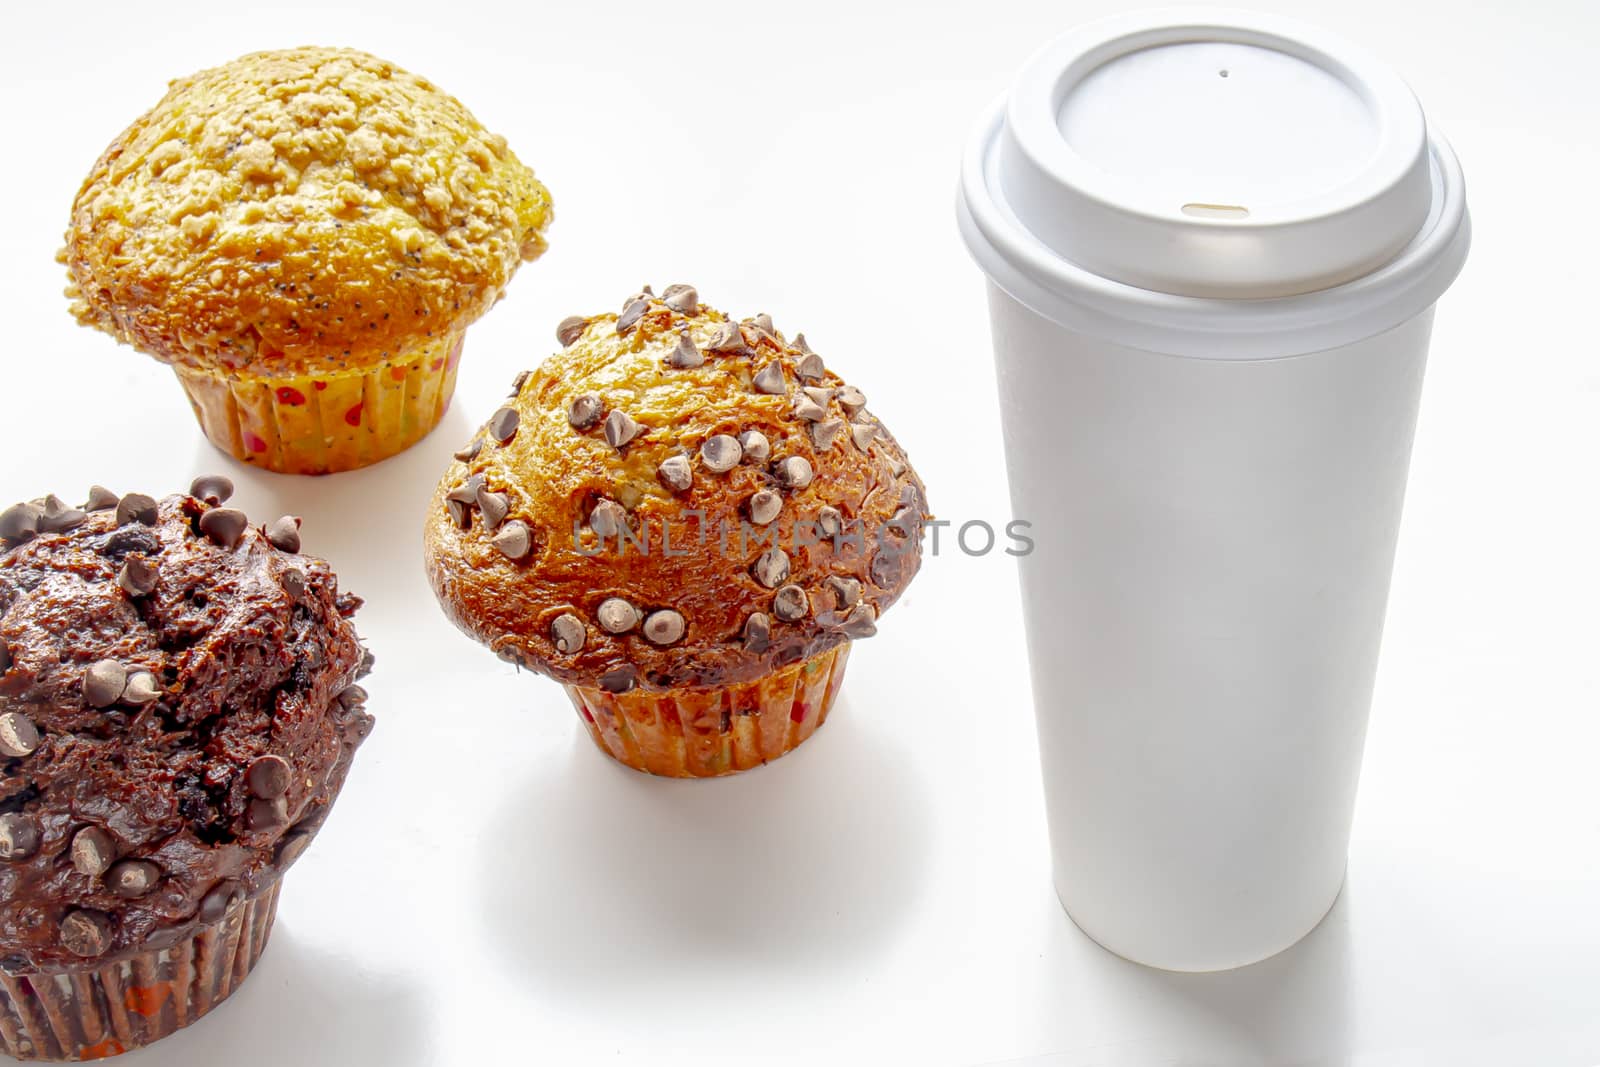 Single-use coffee Cup and muffin on white background by oasisamuel